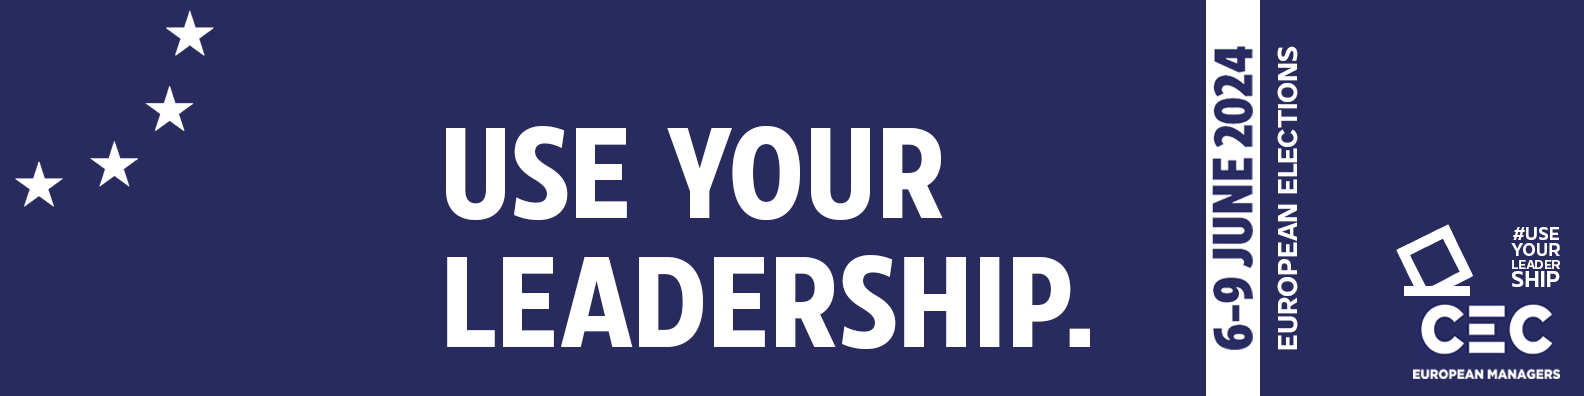 USE YOUR LEADERSHIP - Linked Cover